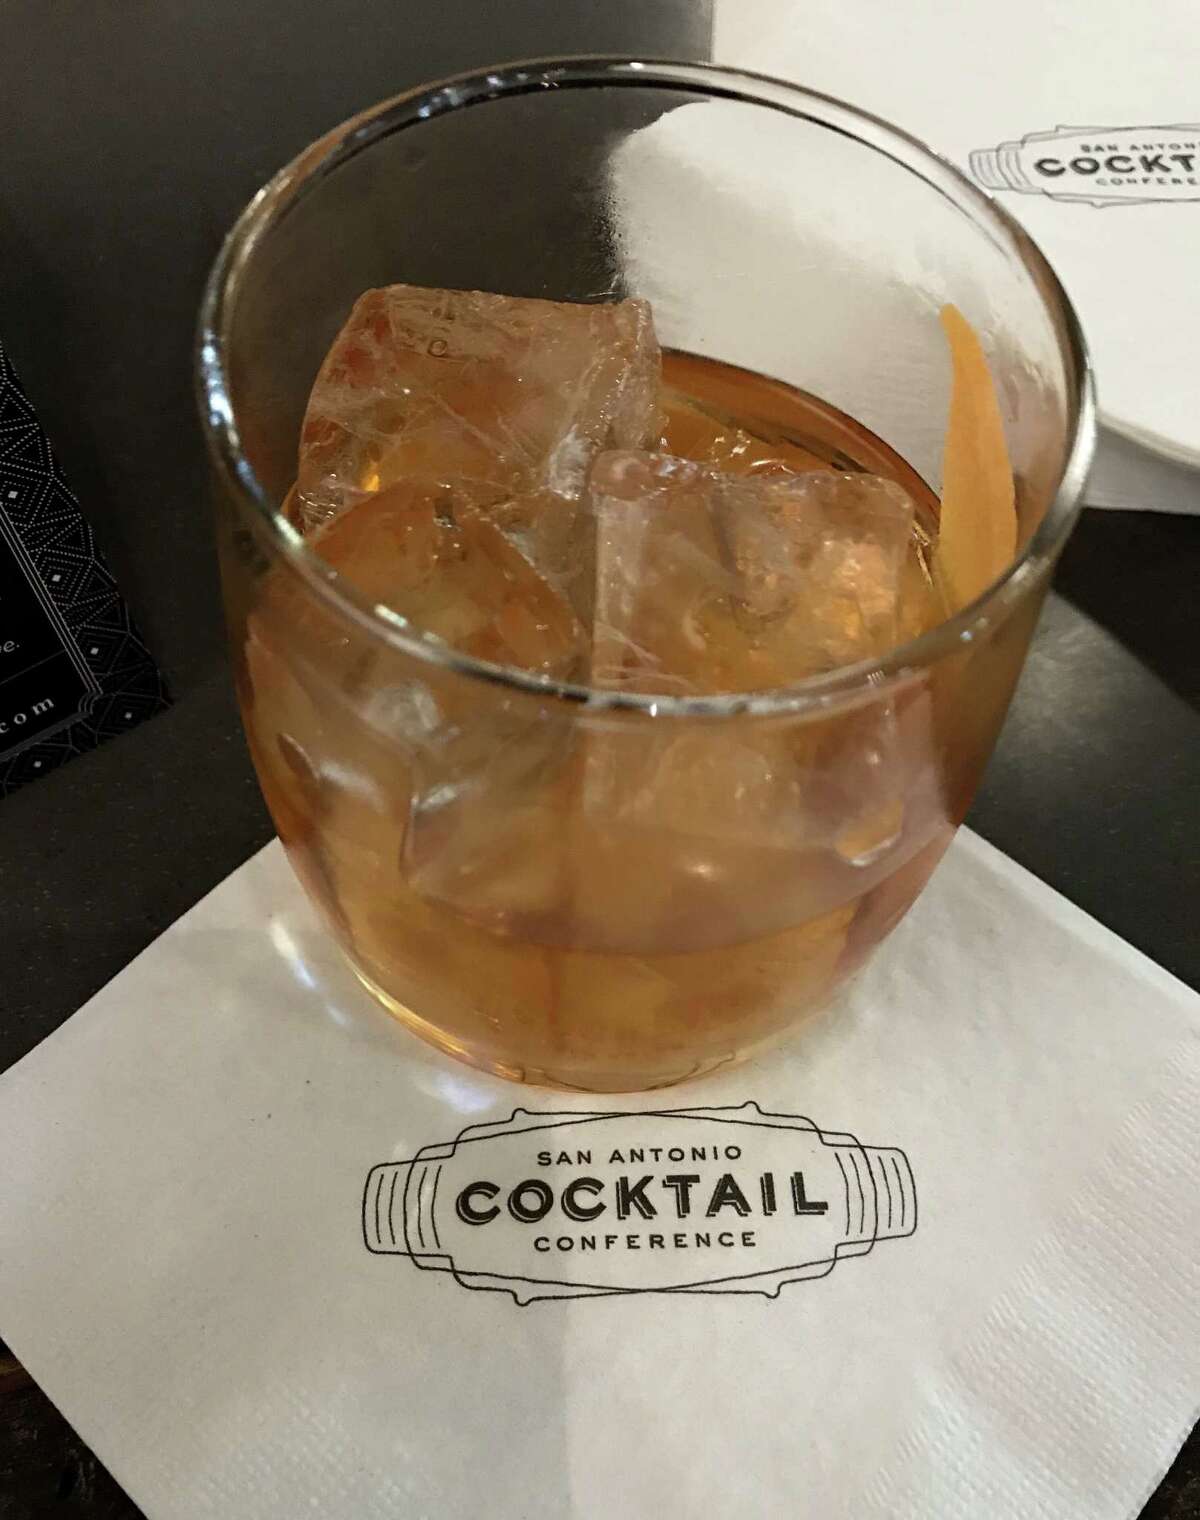 On Wednesday, Sept. 6, the San Antonio Cocktail Conference unveiled its 2018 signature cocktail, the Tío Mío. It's an updated old fashioned, with Herradura Añejo tequila, agave nectar, Angostura bitters, chocolate bitters and the oil from a grapefruit peel.